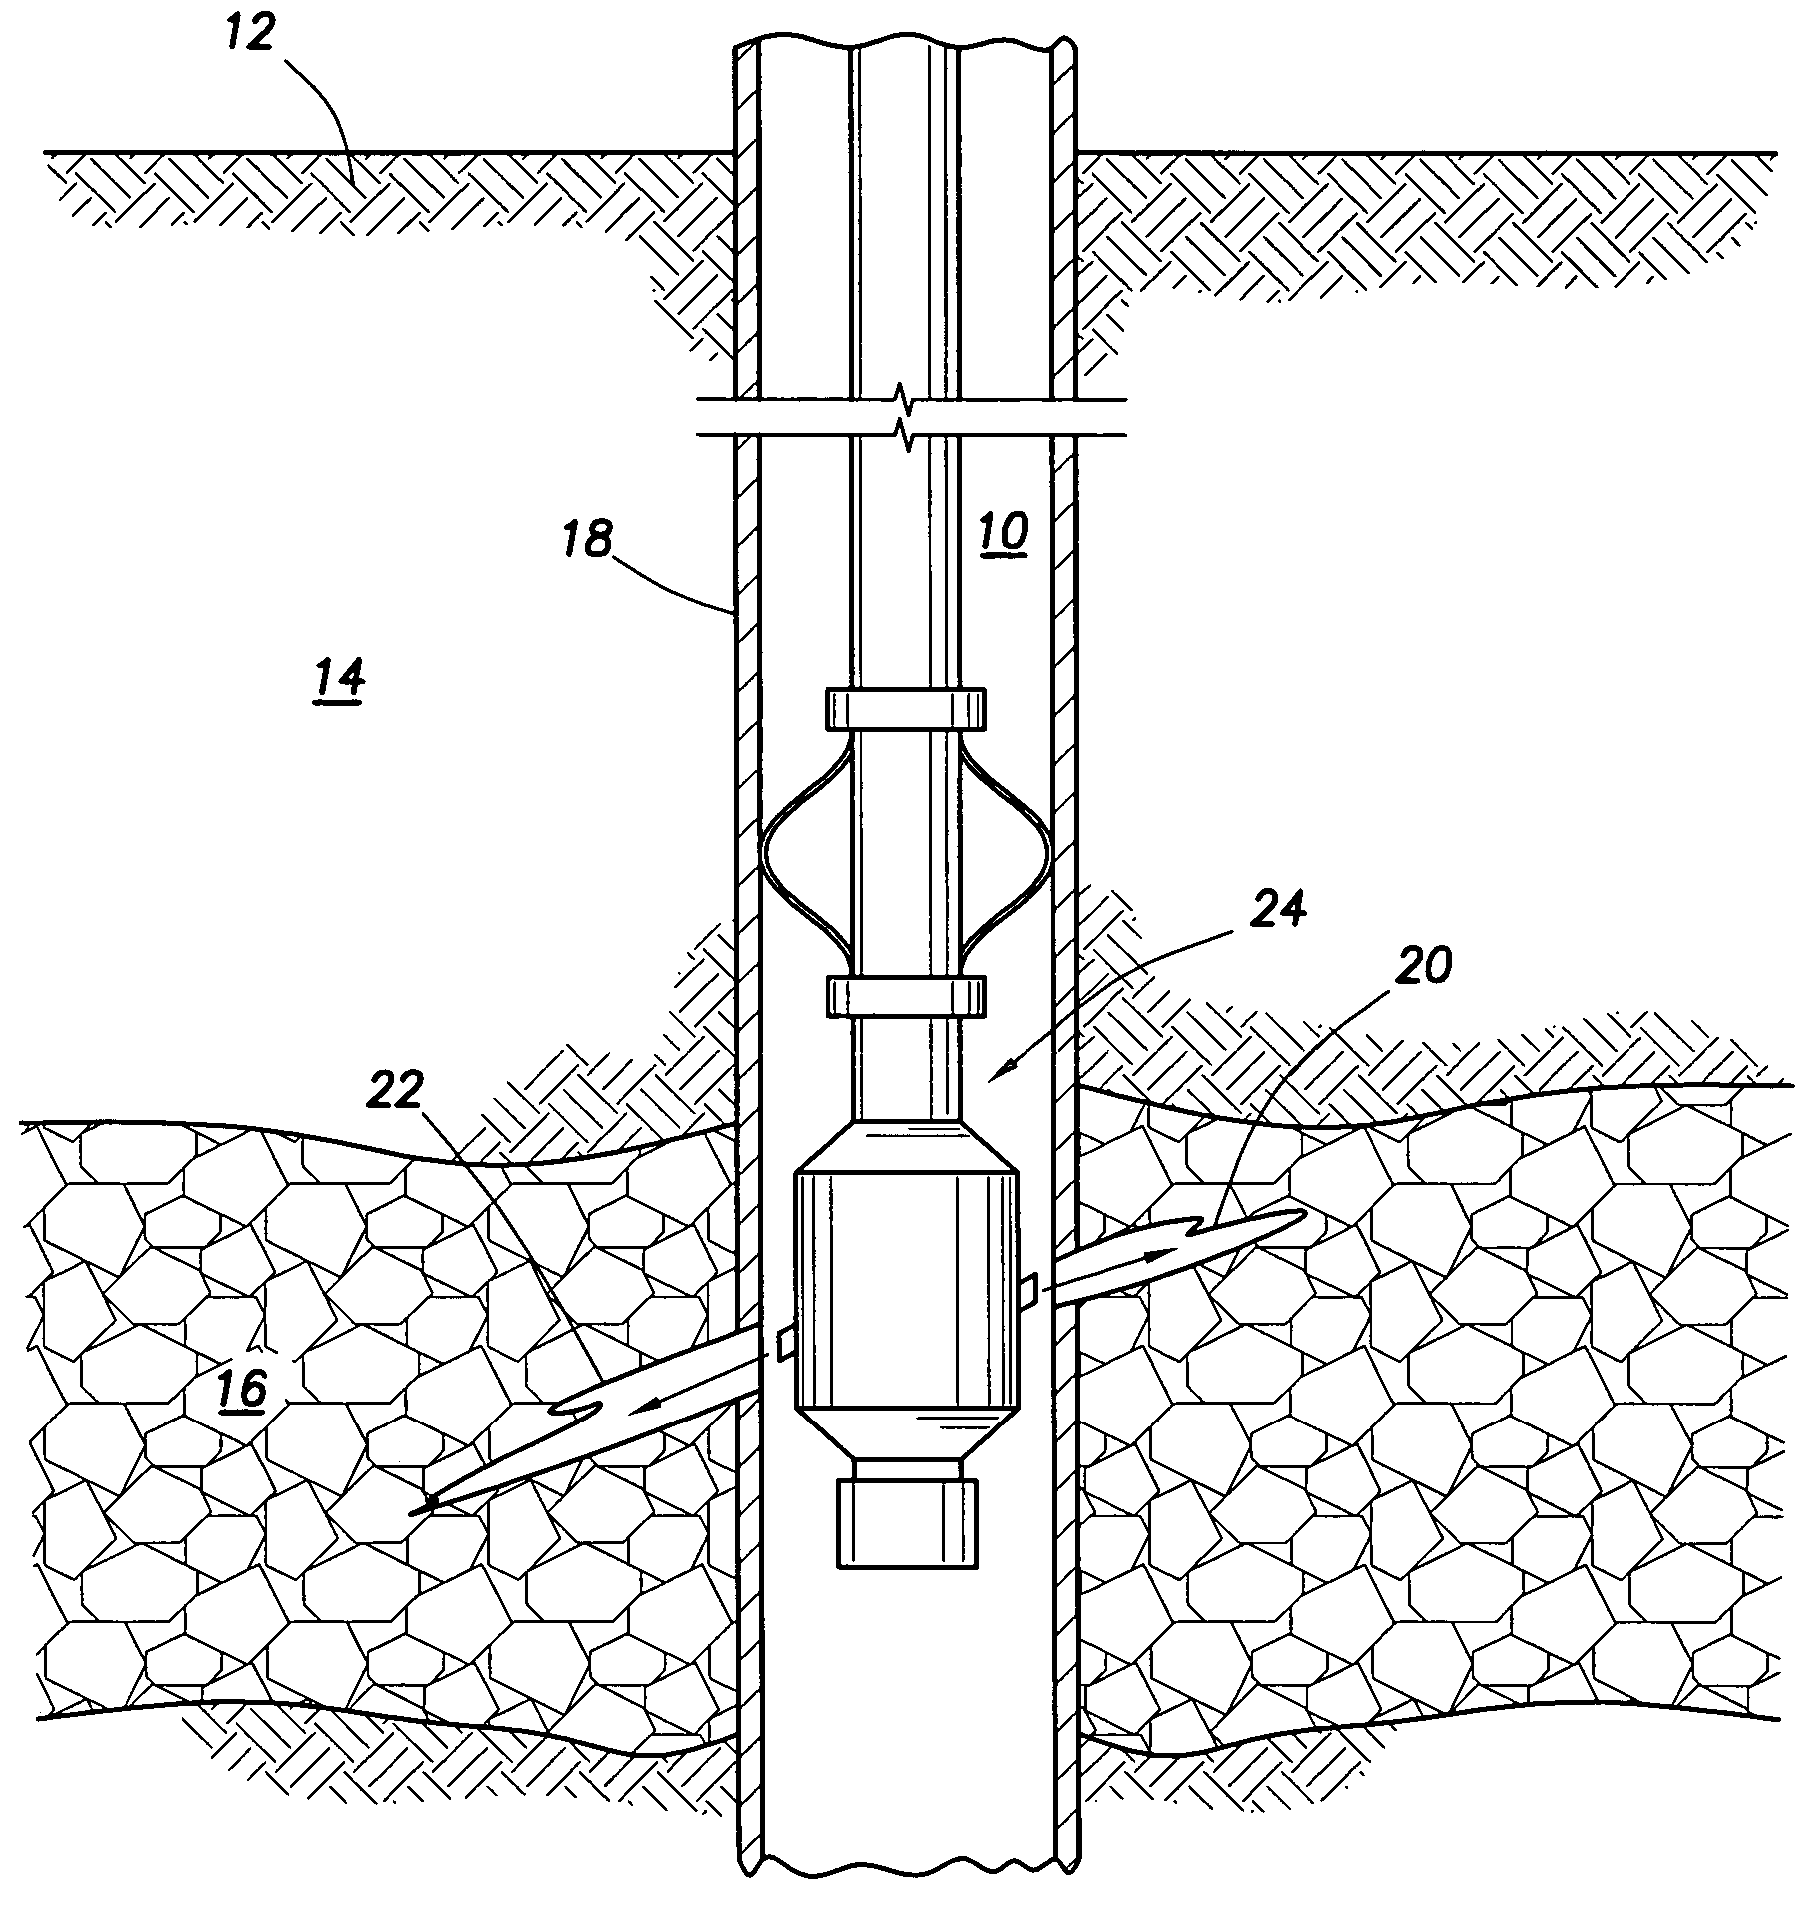 Method of optimizing production of gas from vertical wells in coal seams